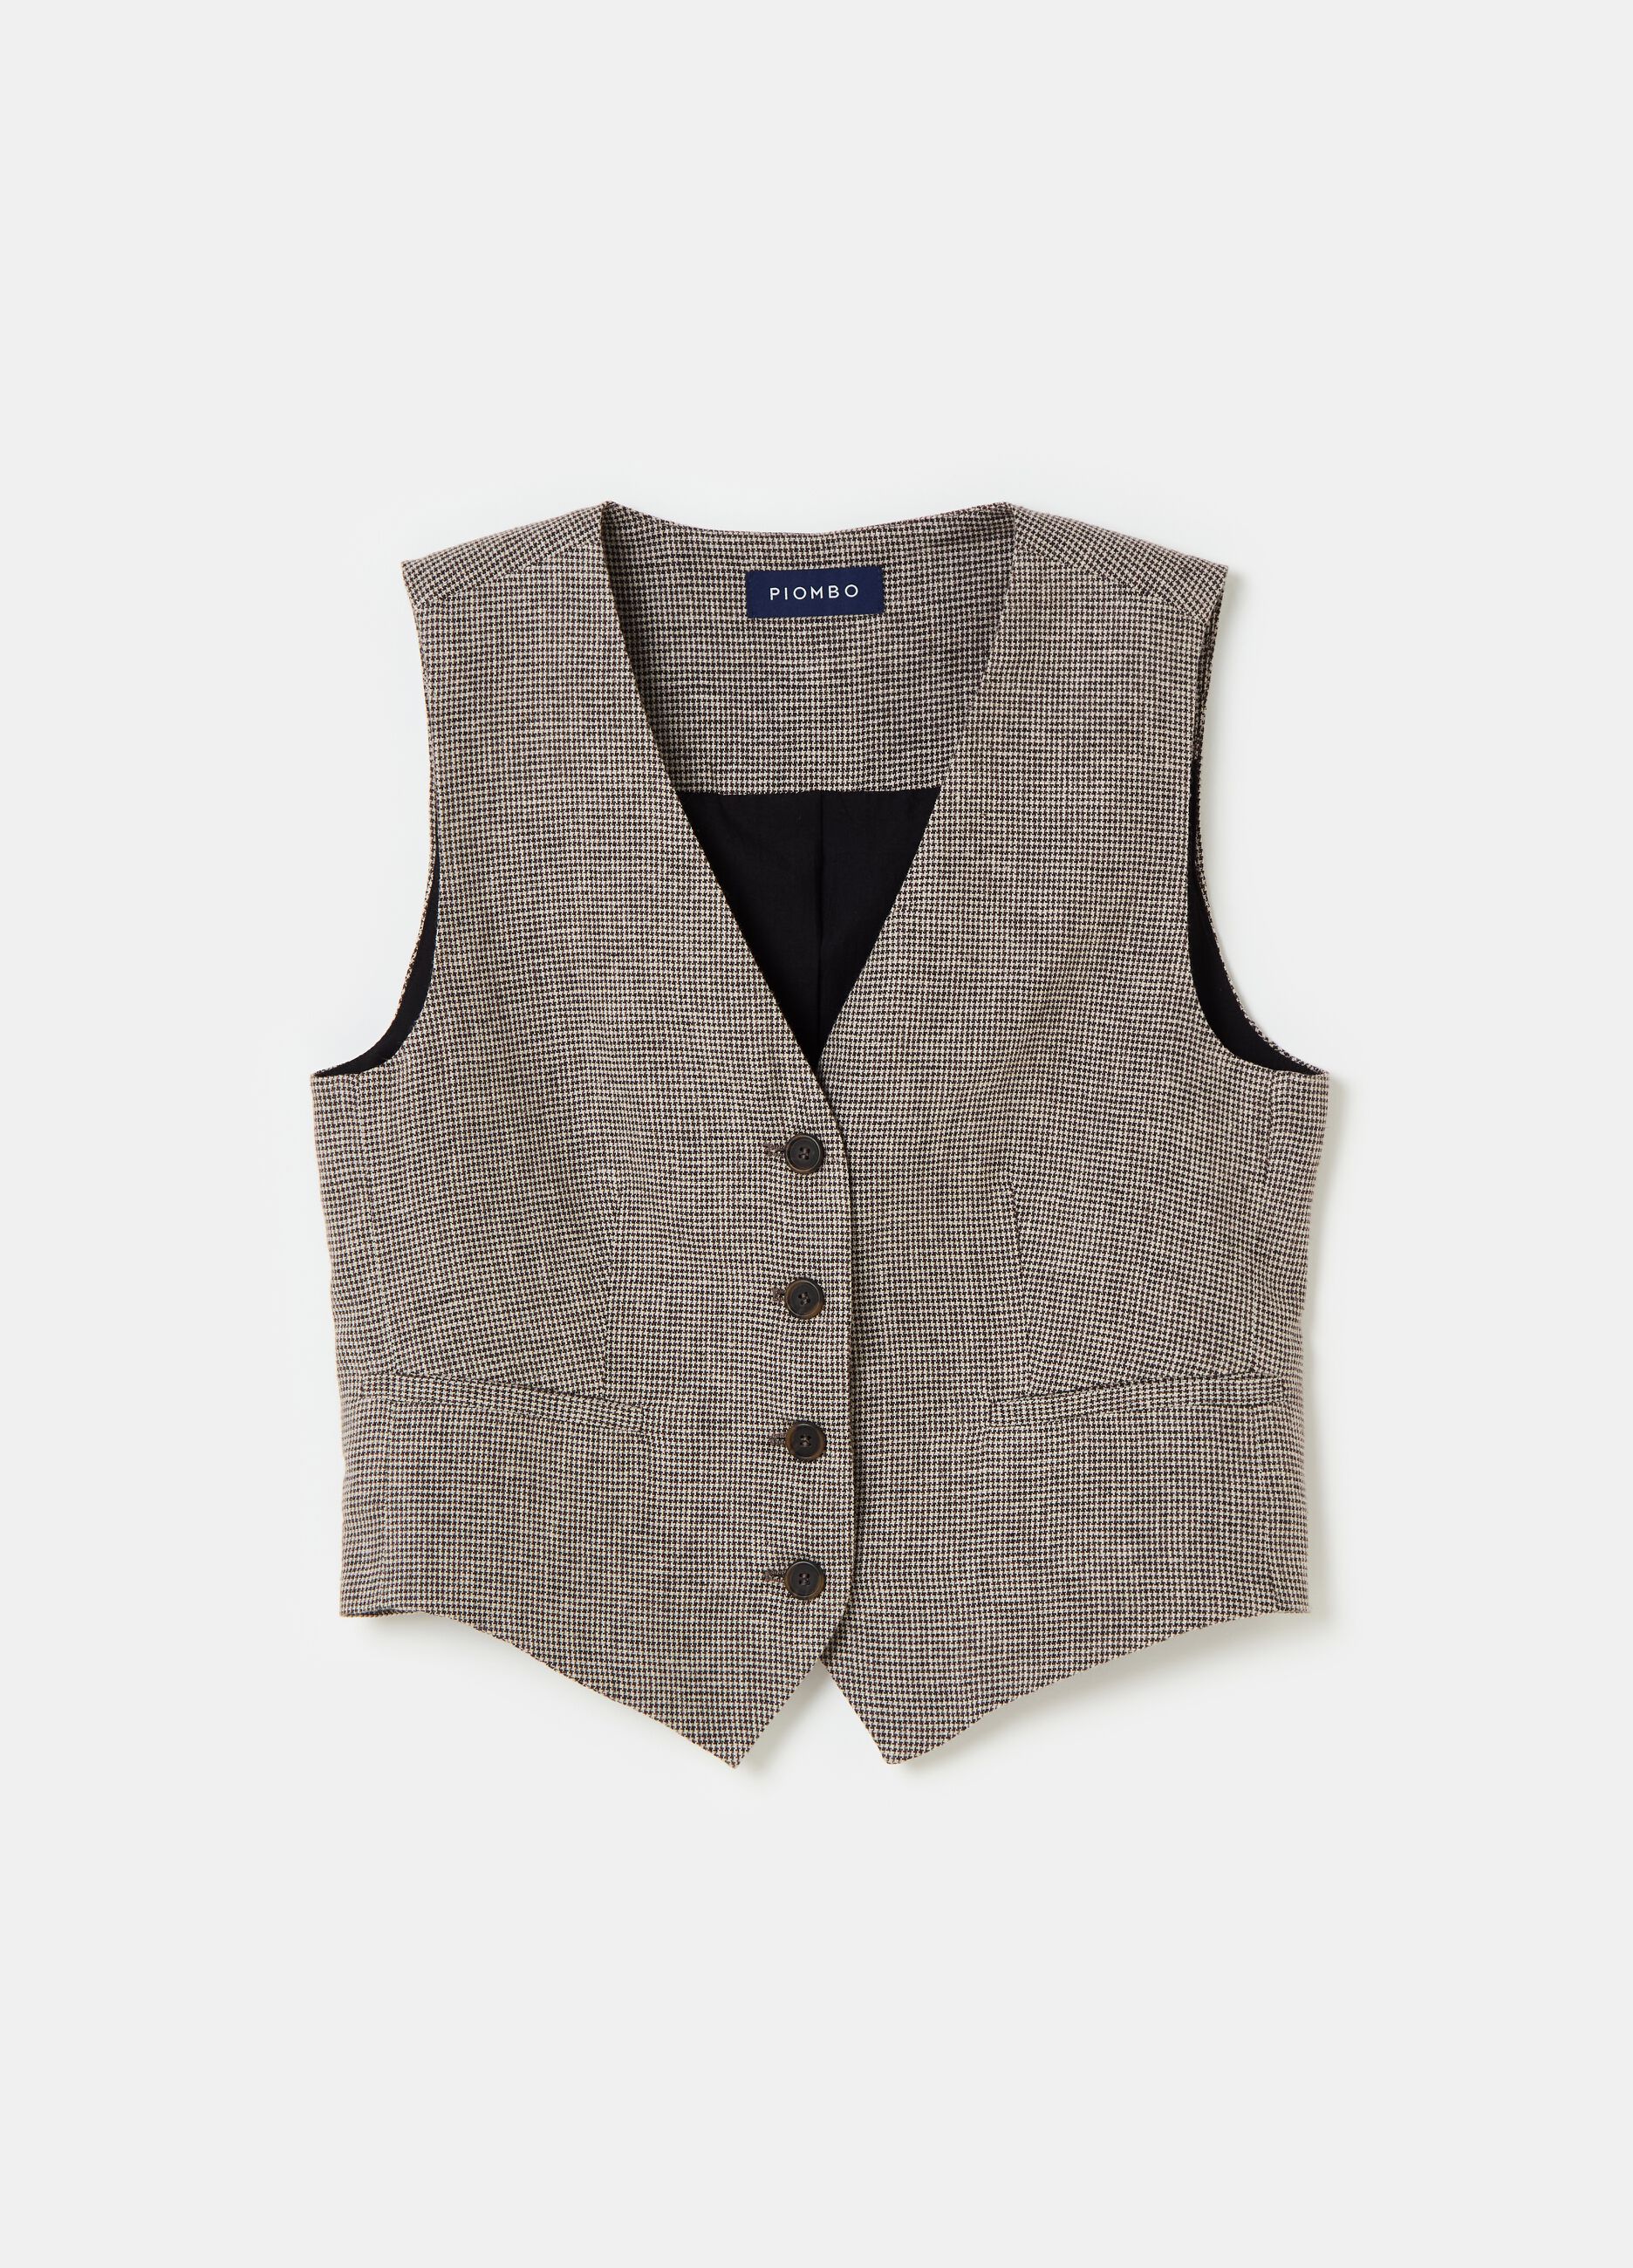 Contemporary single-breasted gilet with micro houndstooth pattern